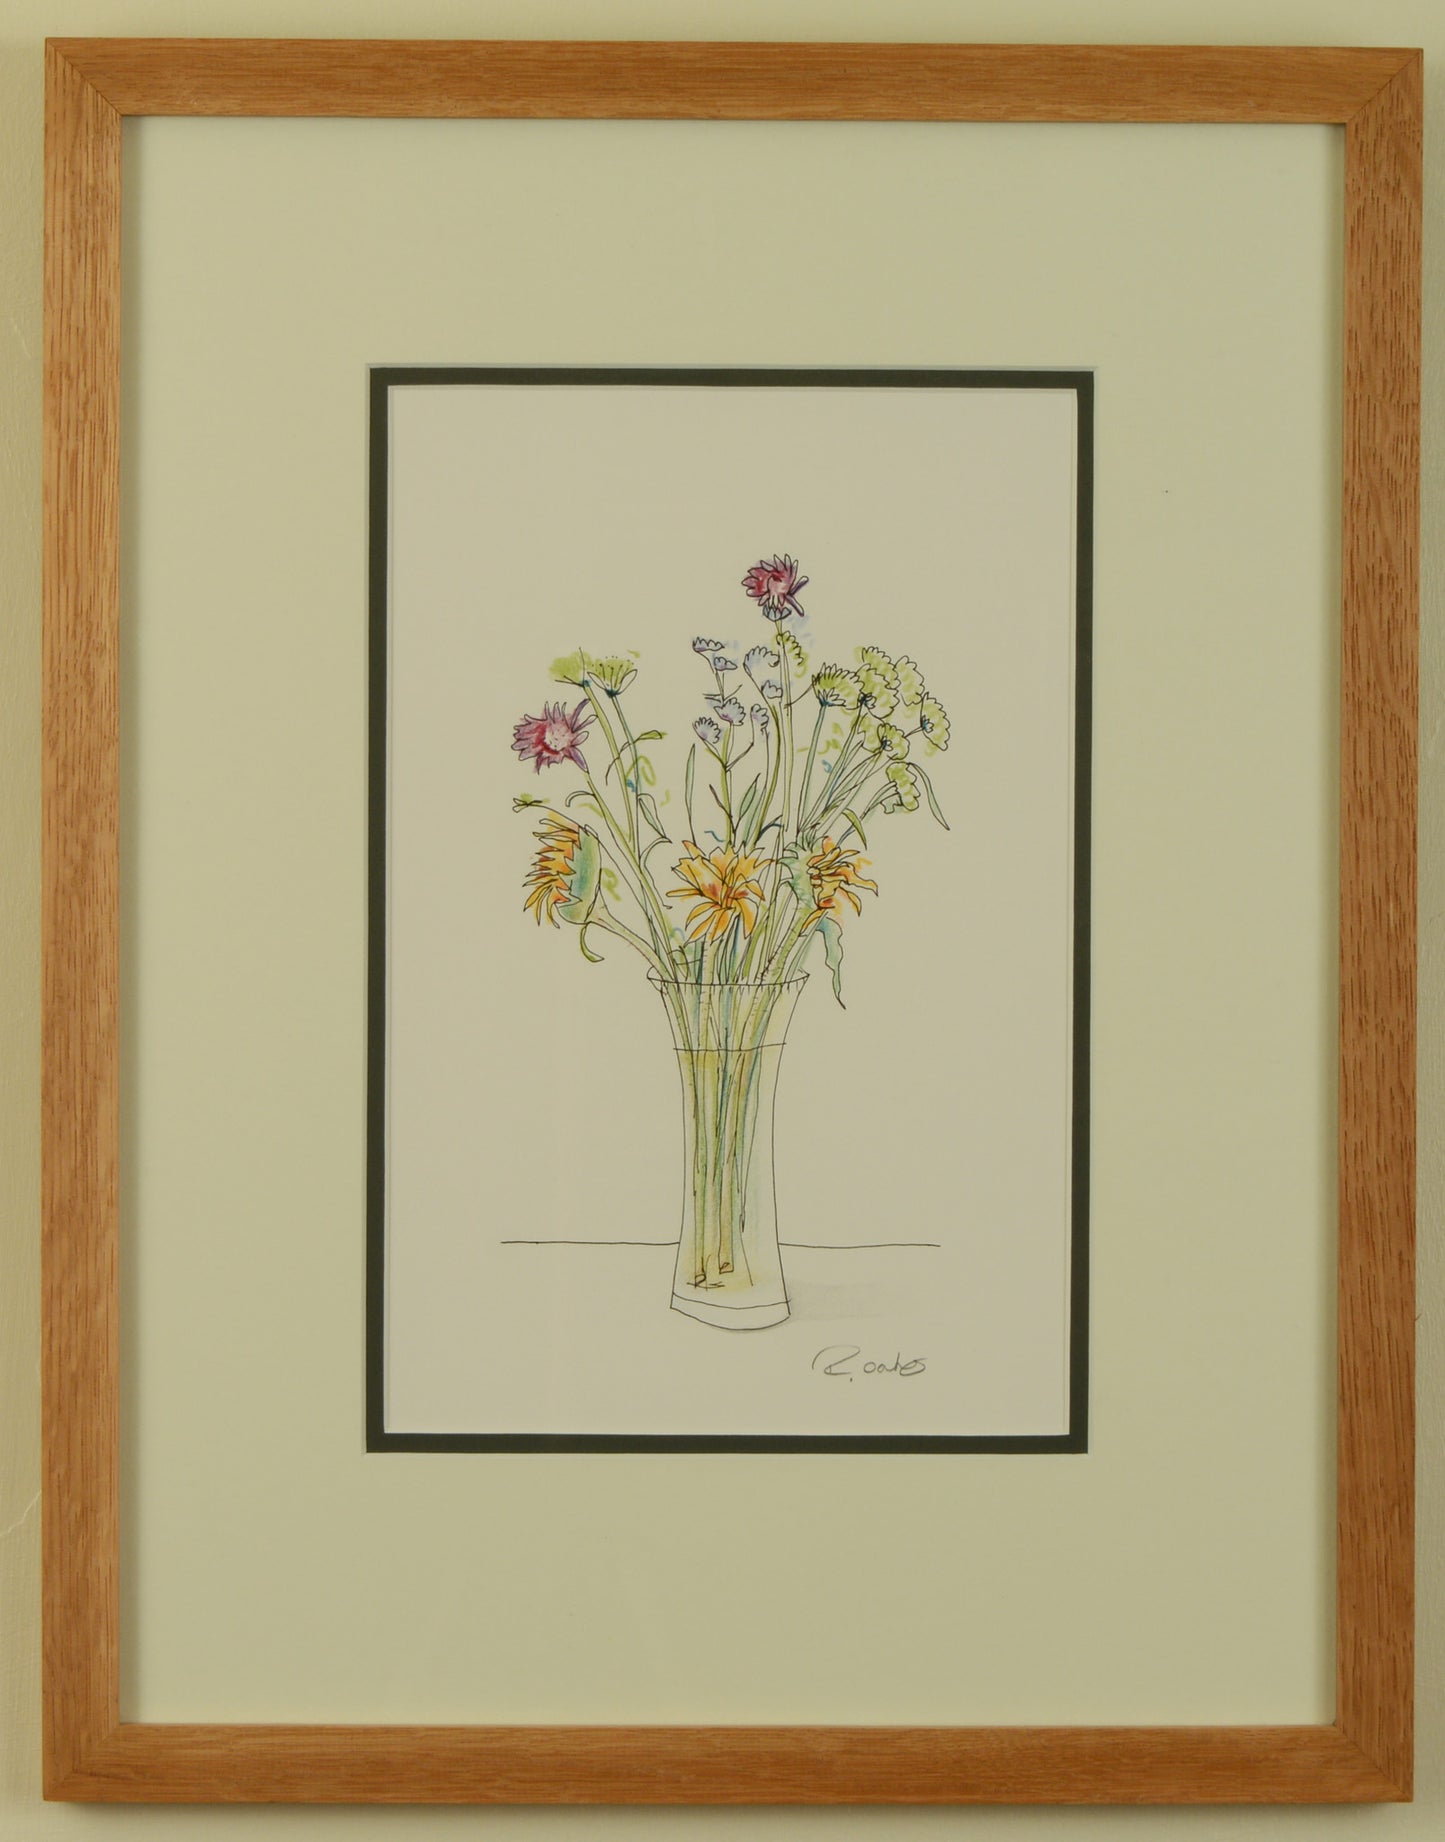 Posy of flowers in a vase - pen and wash drawing by Richard Oakes